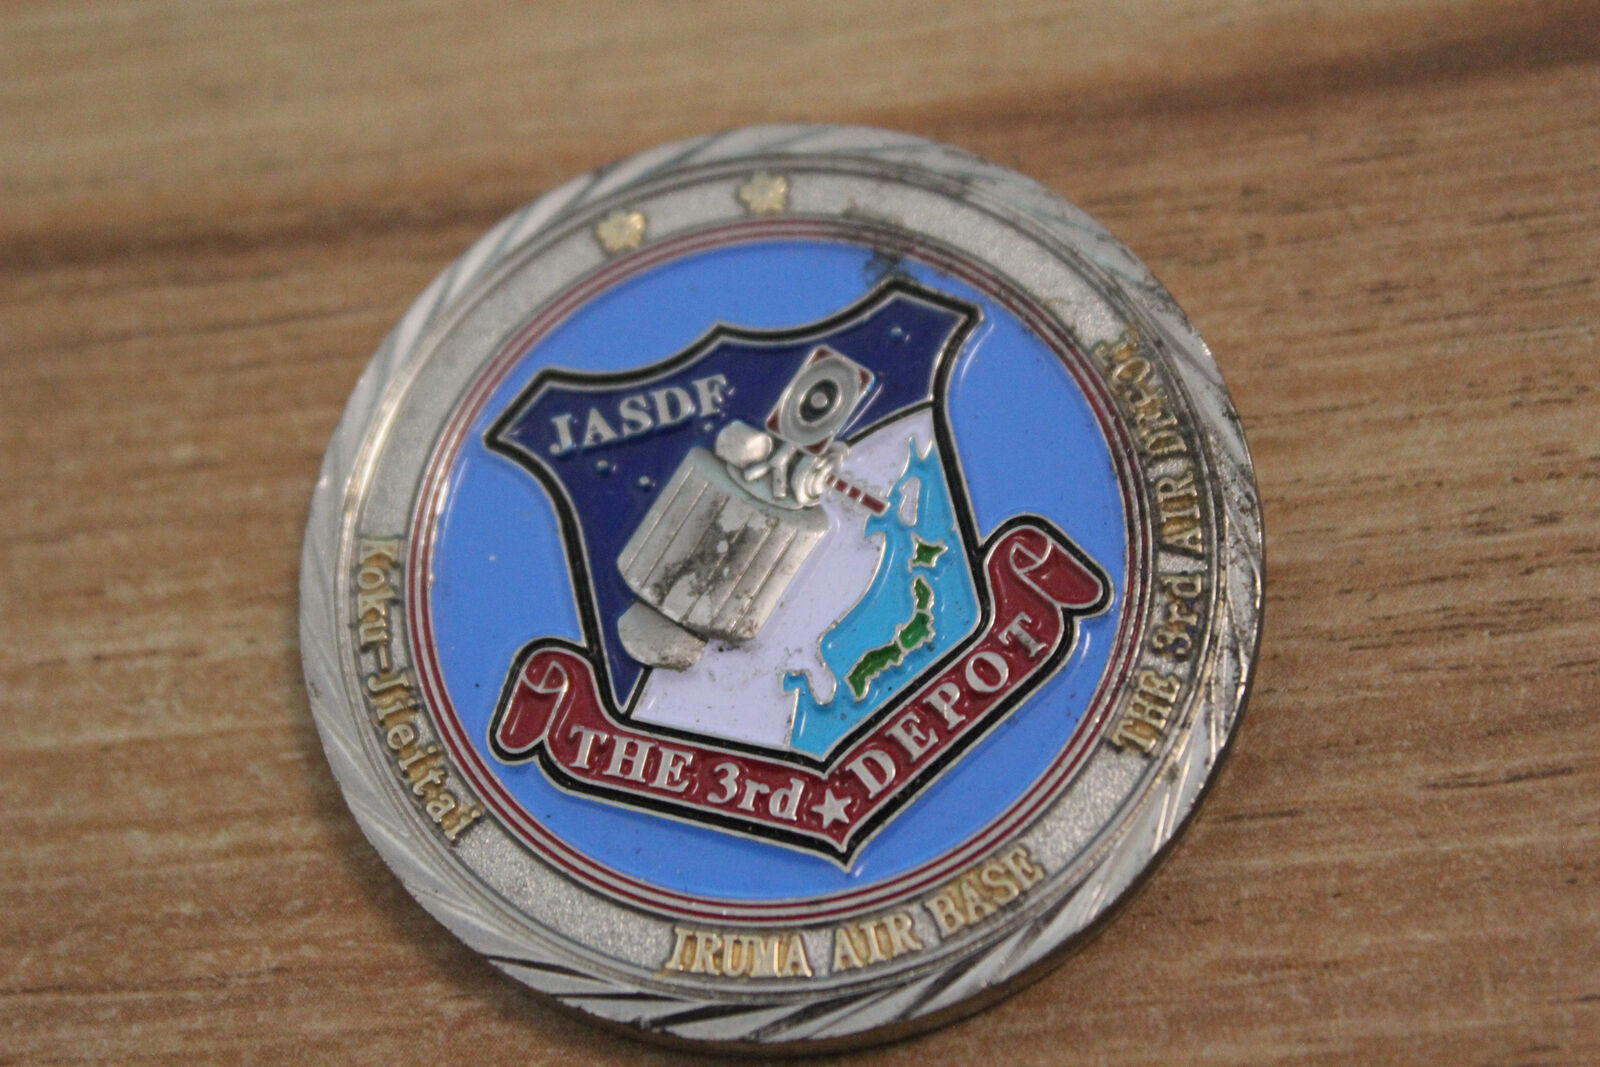 JASDF The 3rd Depot Challenge Coin